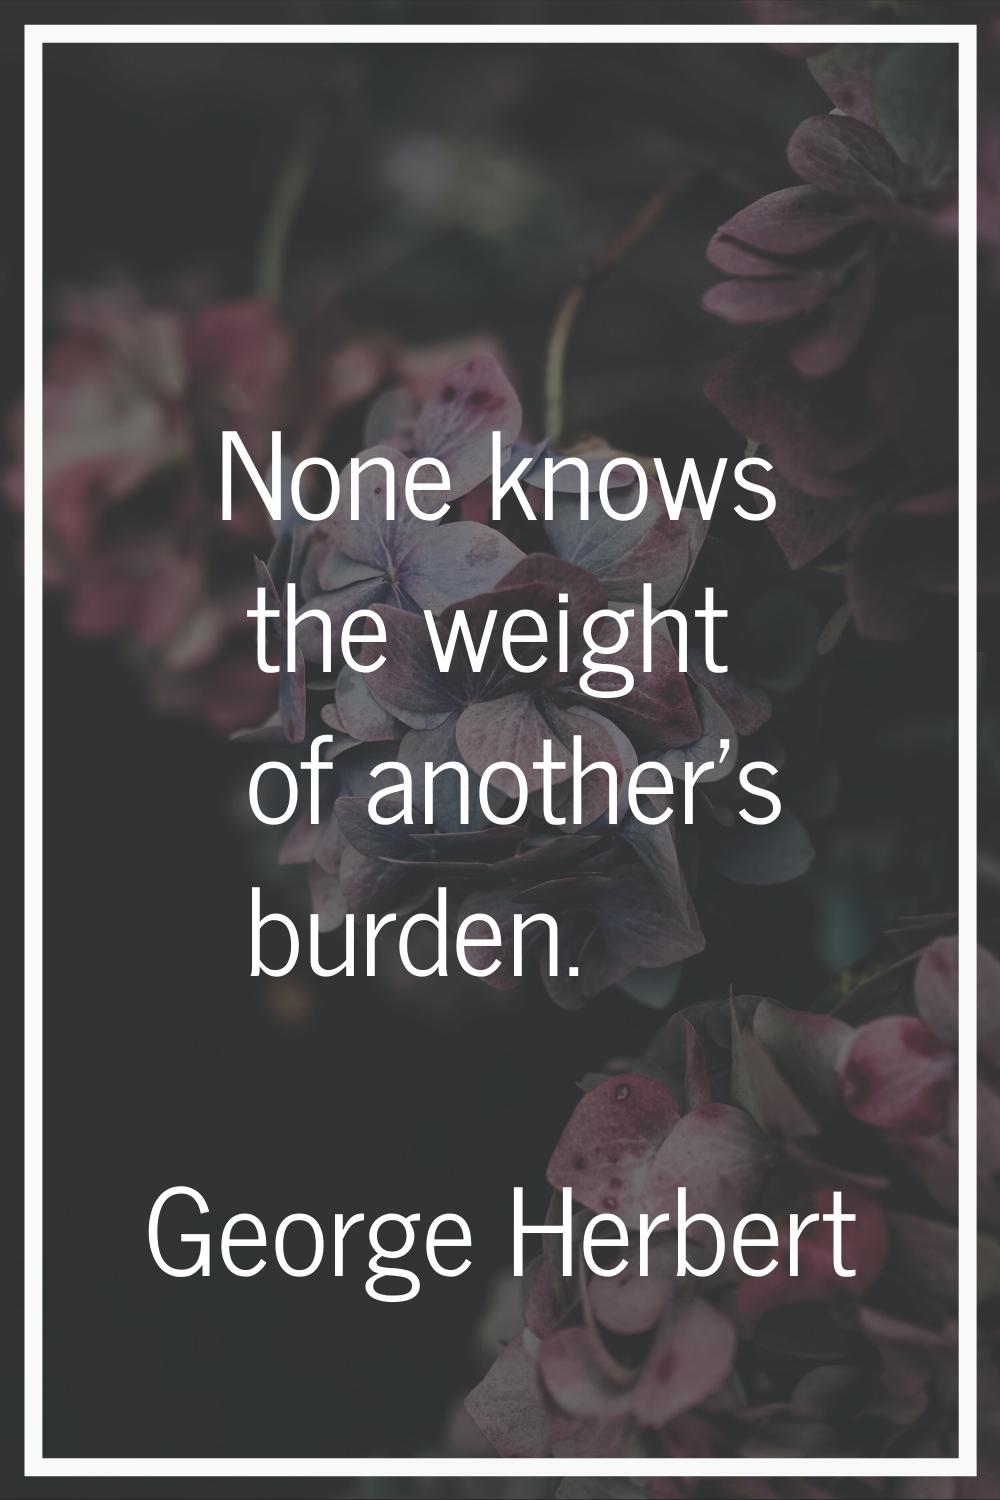 None knows the weight of another's burden.